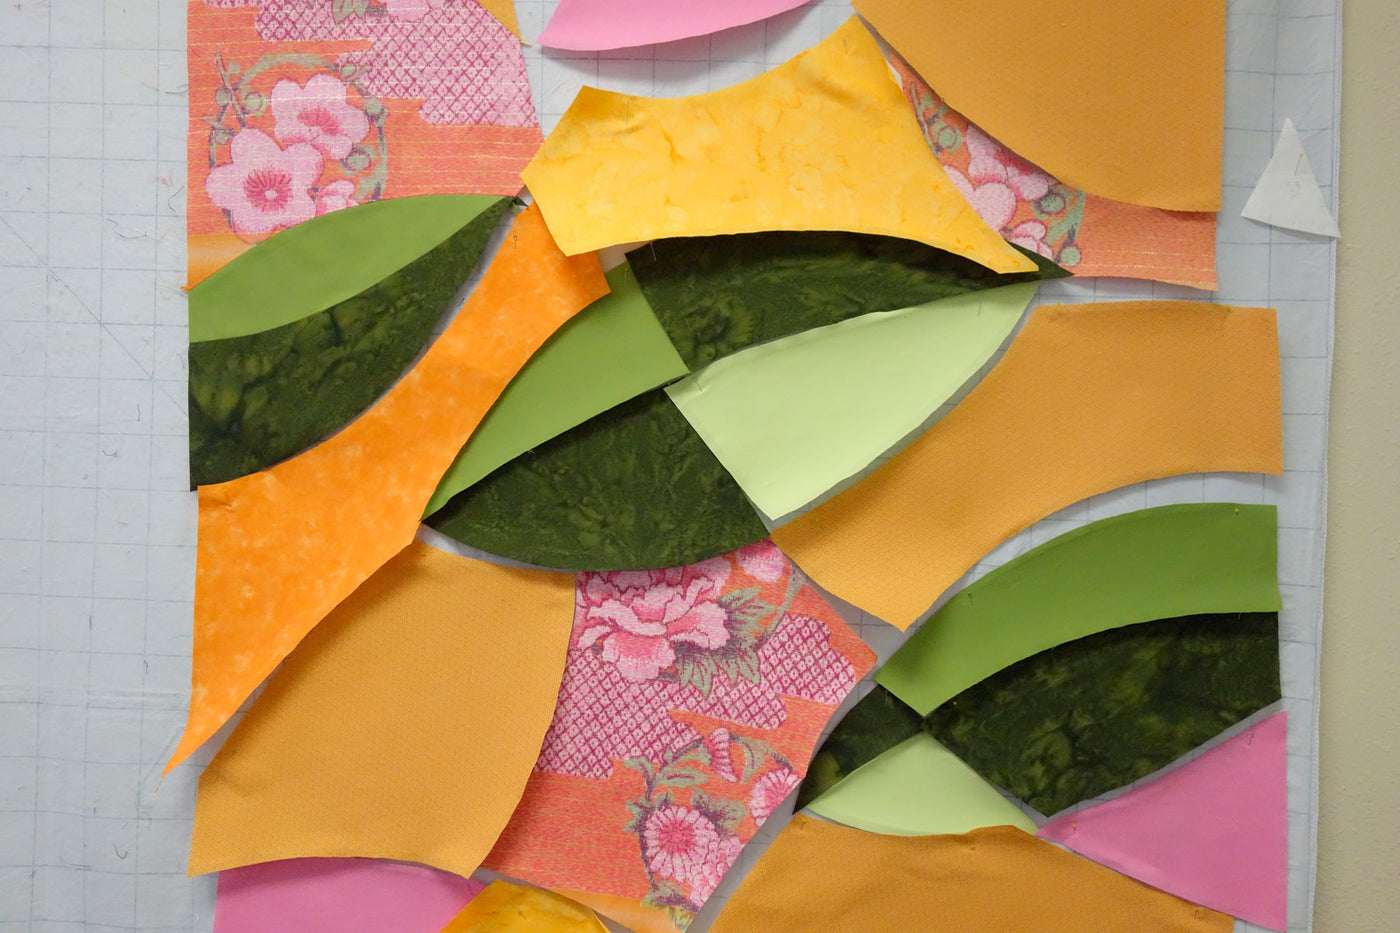 Curved piecing workshops with Patricia Belyea